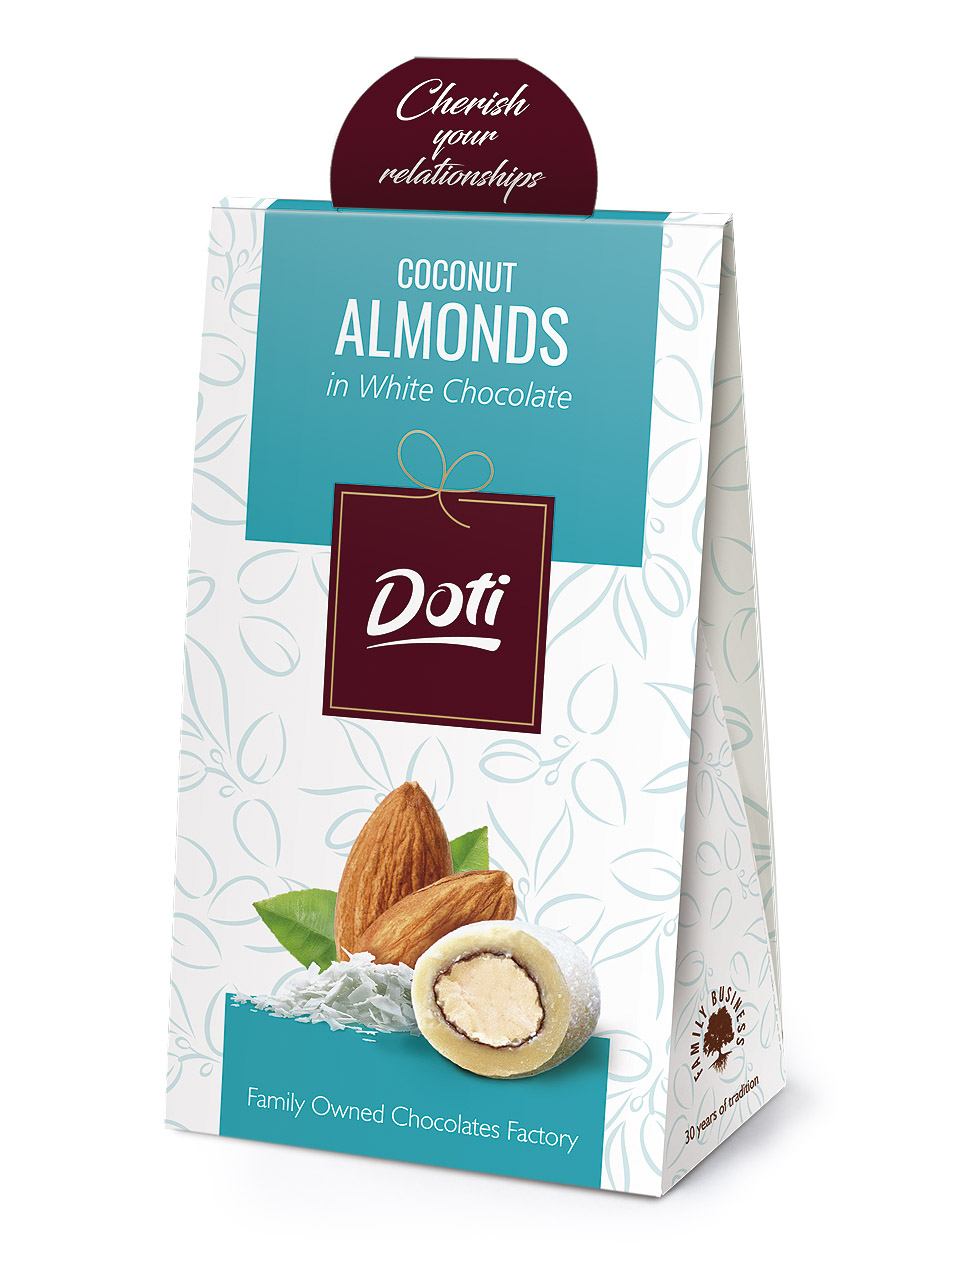 Doti Almonds in White Chocolate with Coconut 100g new sachet